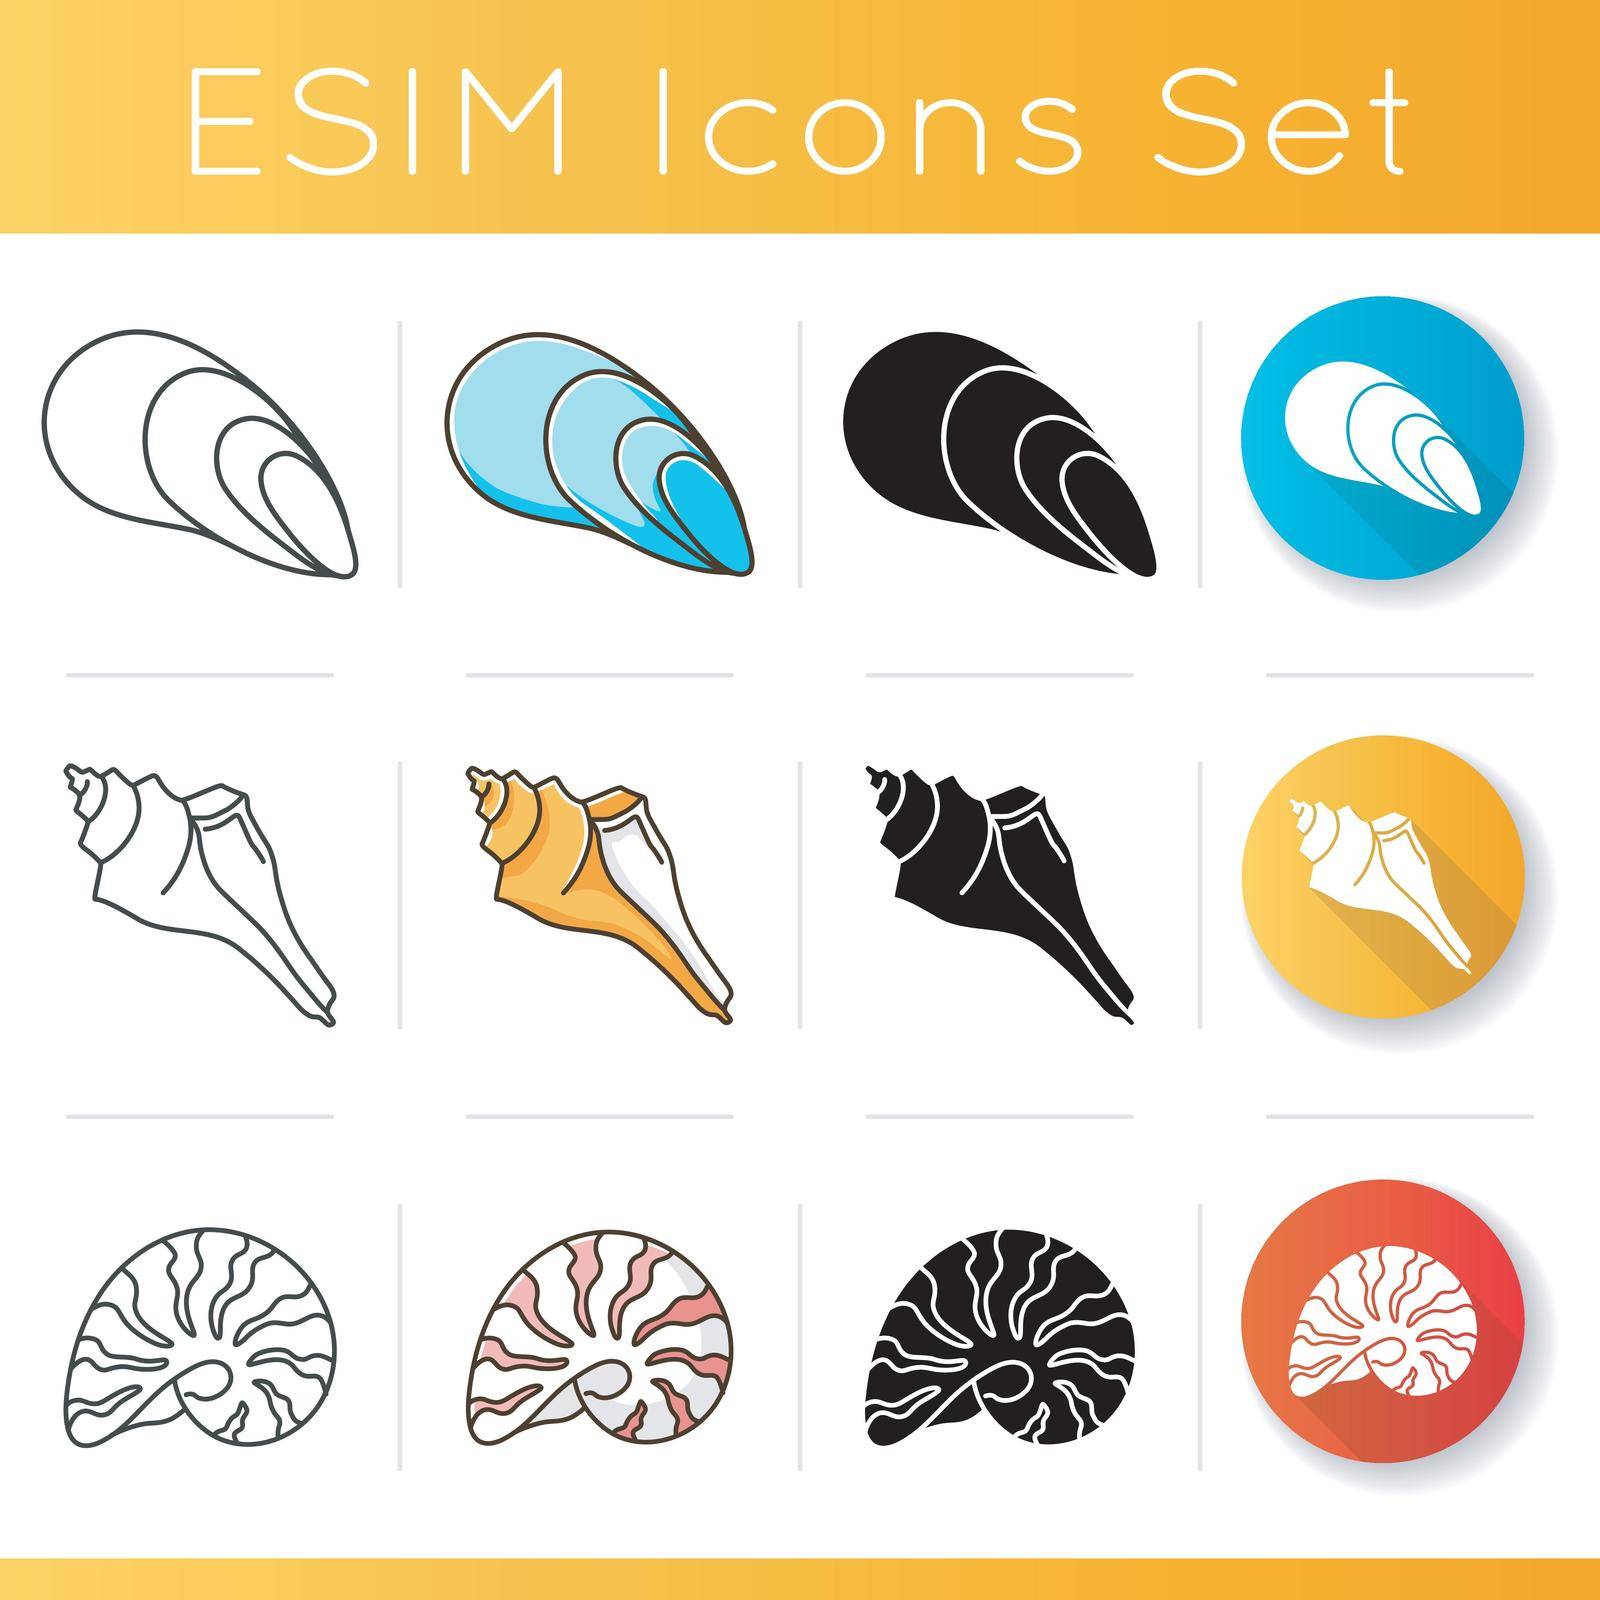 Seashells icons set. Linear, black and RGB color styles. Different mollusk shells, conchology. Decorative ocean souvenirs. Various sea shells collection vector isolated illustrations